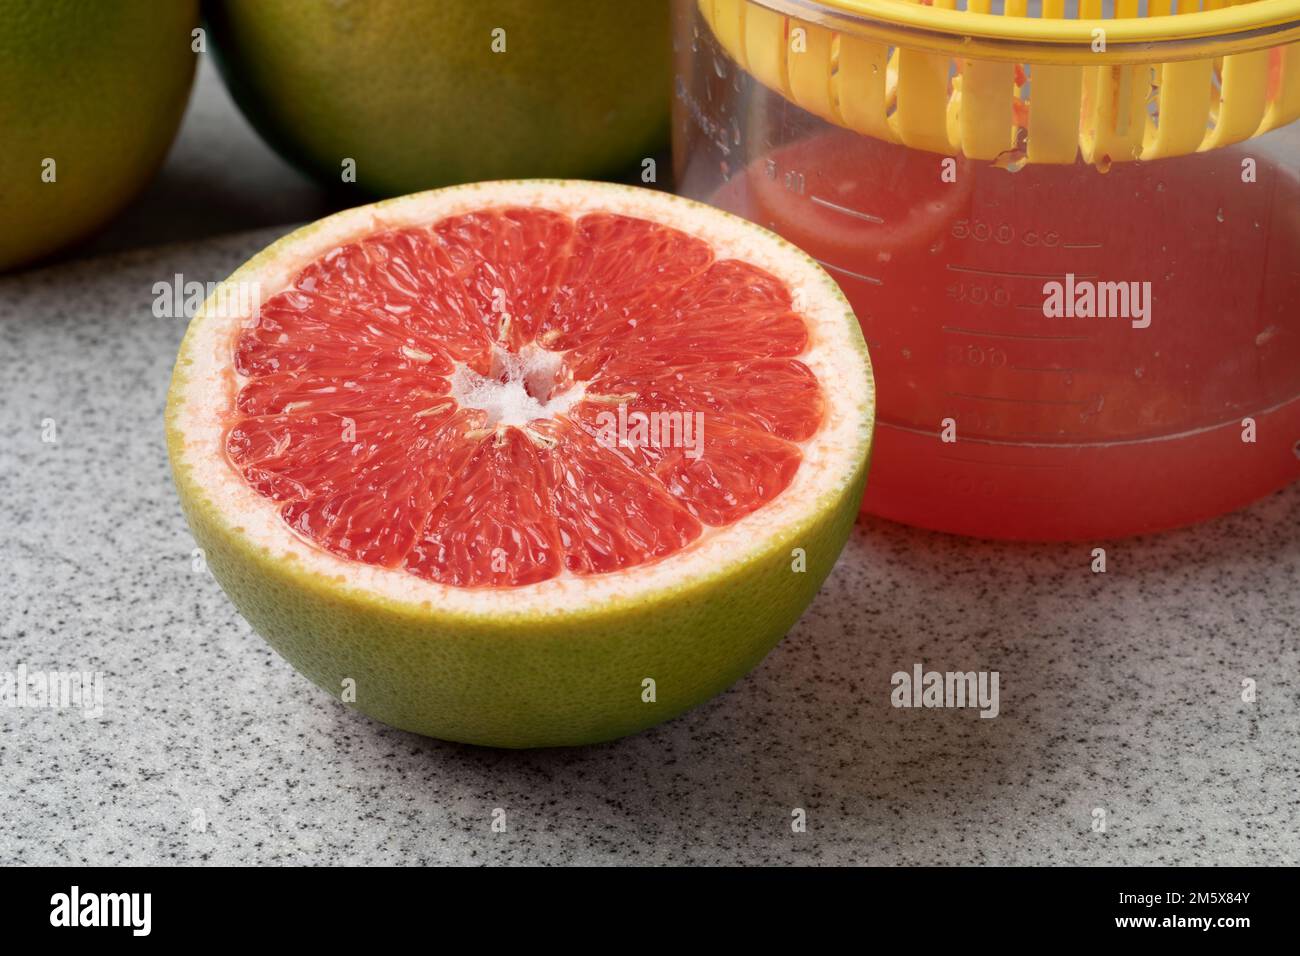 Halved red grapefruit and fresh pressed juice close up Stock Photo